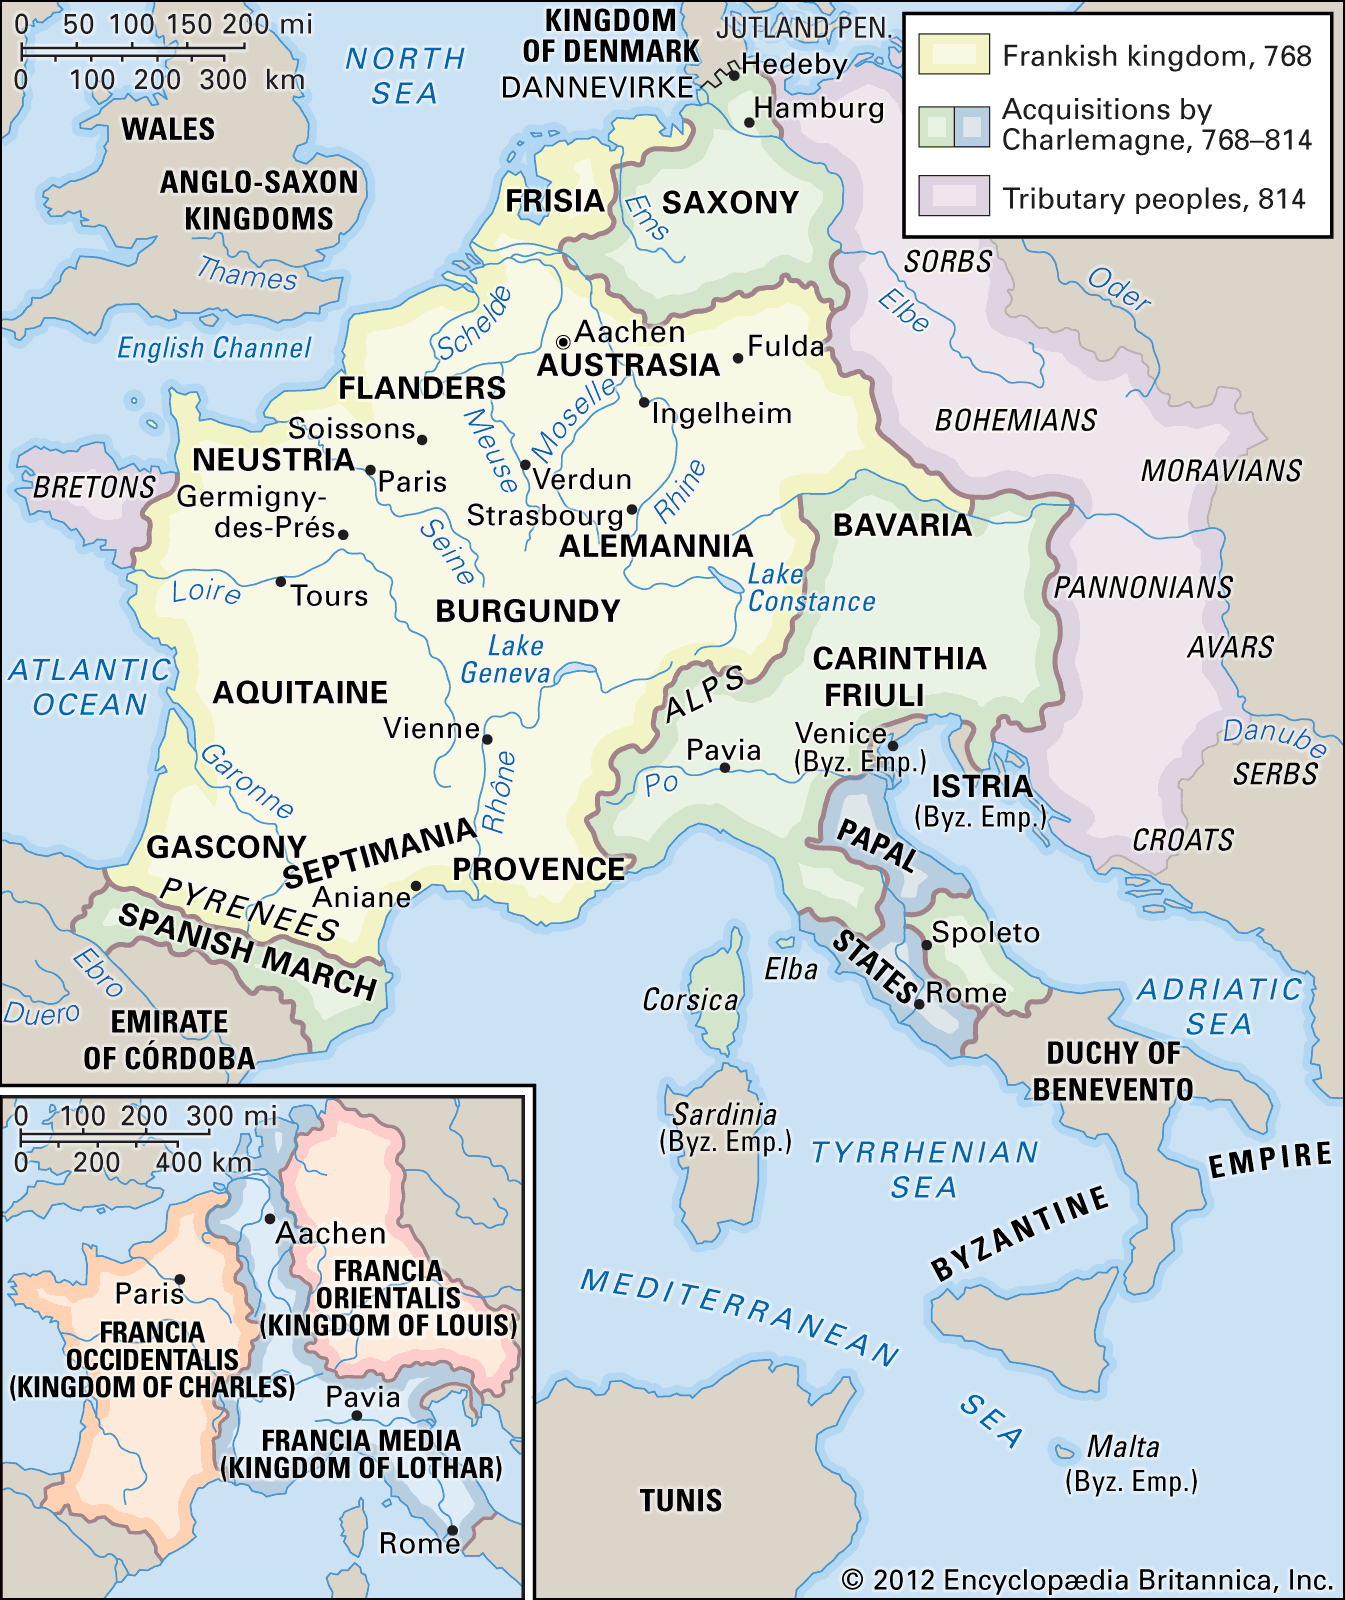 A map of the Carolingian empire including the Frankish Kingdom and areas acquired by Charlemagne. The map inset shows the borders of the three kingdoms that emerged from the partition of the Frankish empire after the Treaty of Verdun, 843. The map has labels for major cities, rivers, and seas.